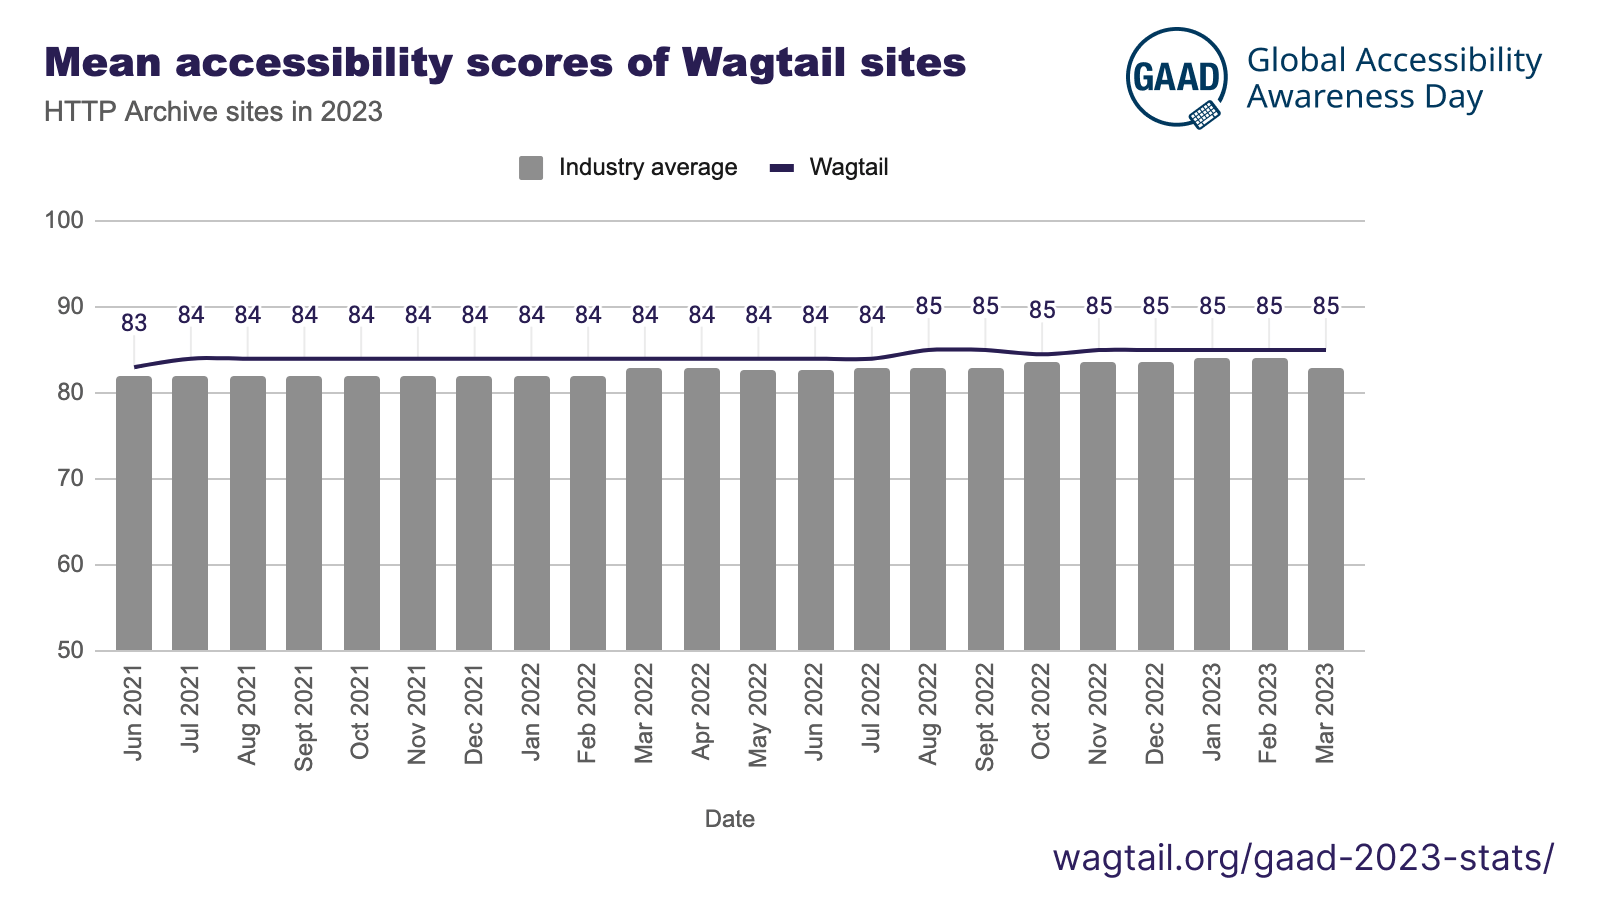 Mean accessibility scores of Wagtail sites - HTTP Archive sites in 2023 - GAAD 2023